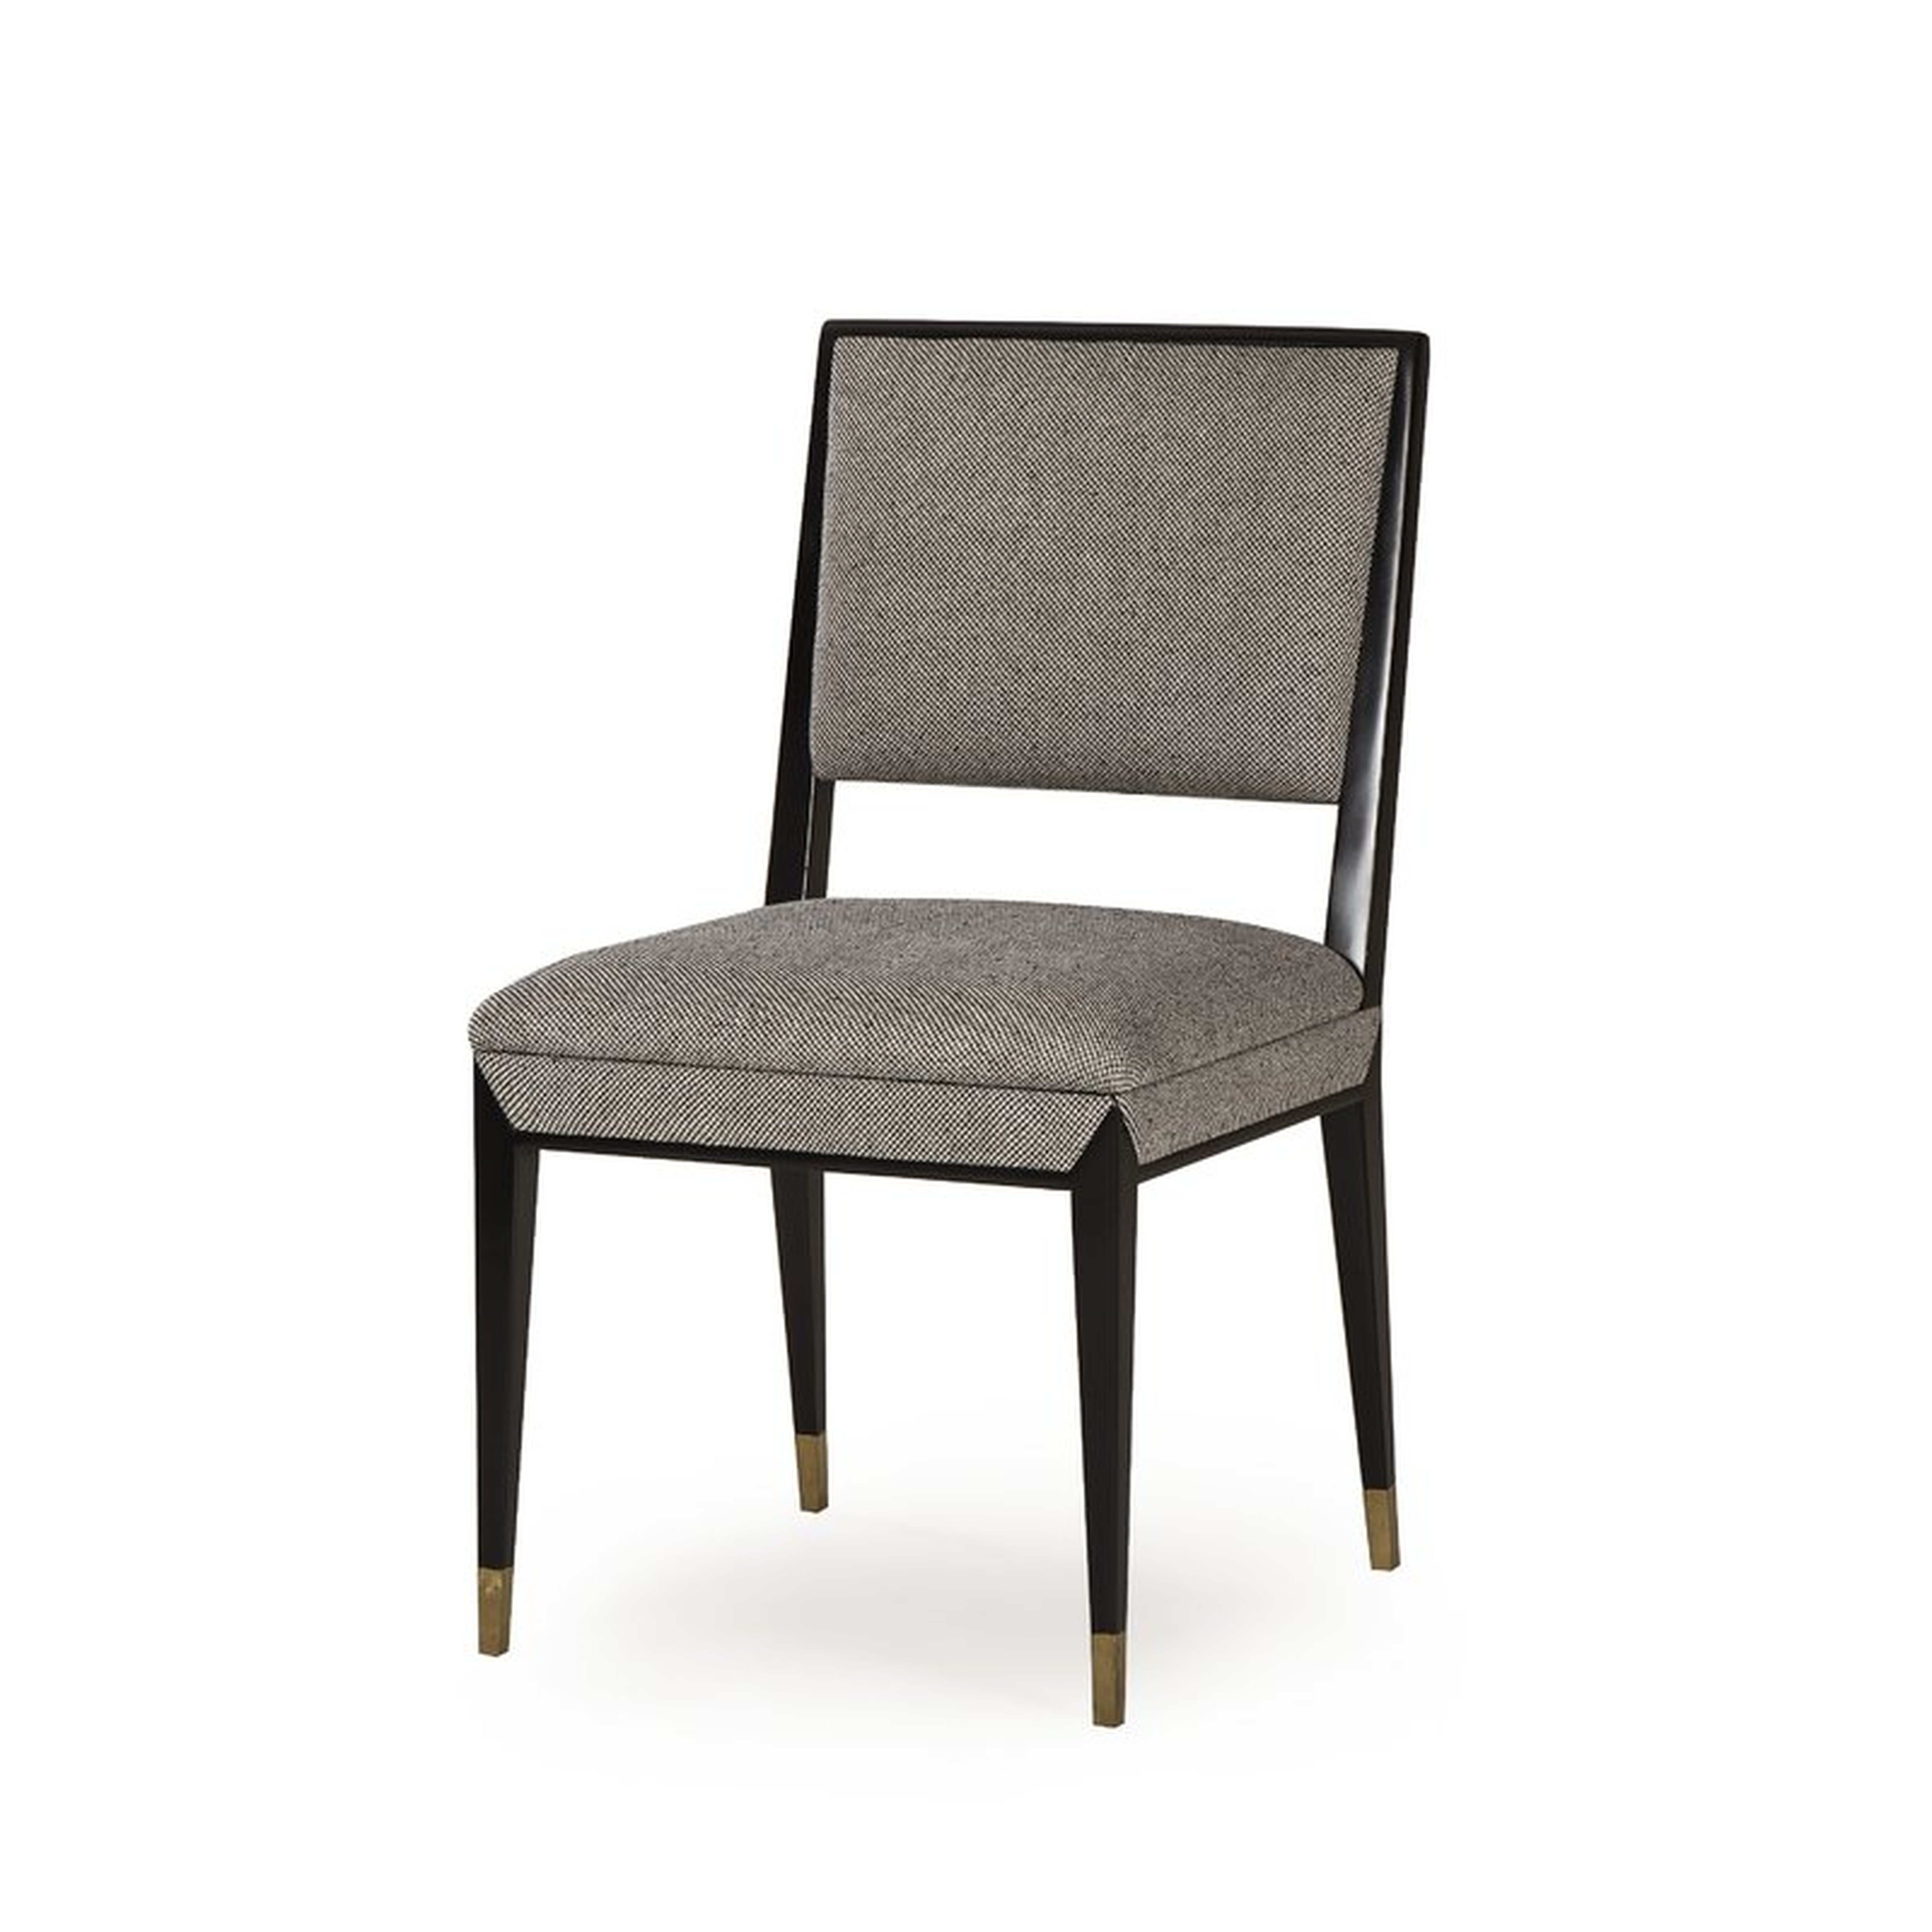 BOYD REFORM WINSTON SPECKLE UPHOLSTERED DINING CHAIR - Perigold